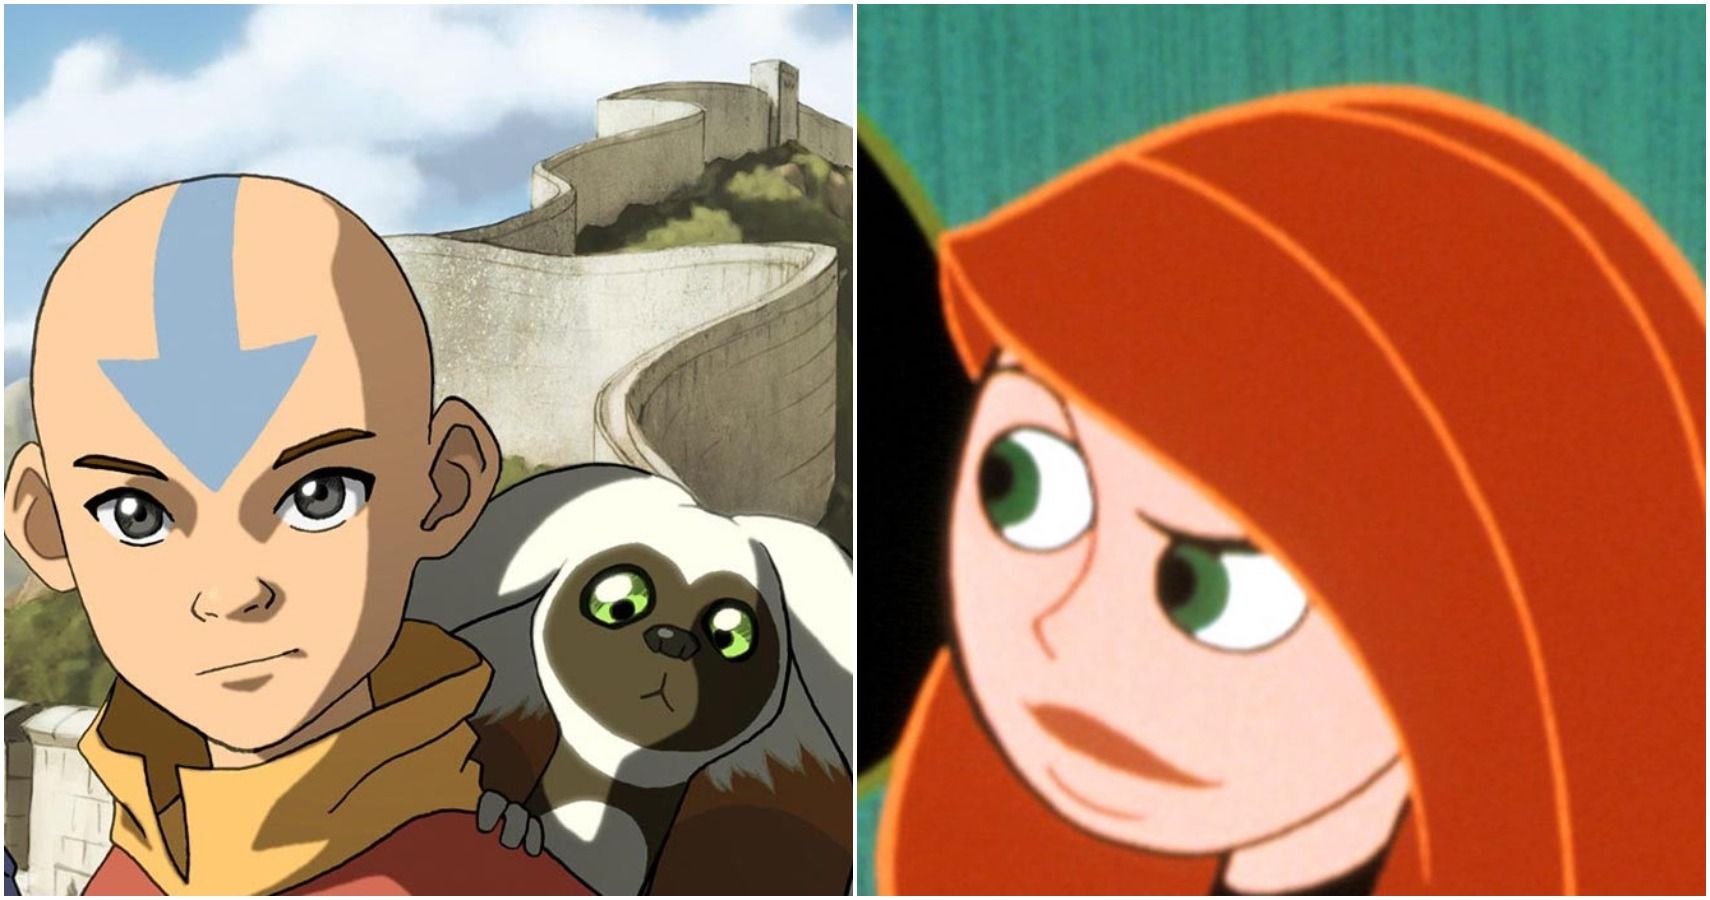 5 Things Avatar The Last Airbender Did Better Than Kim Possible (& Vice Versa)